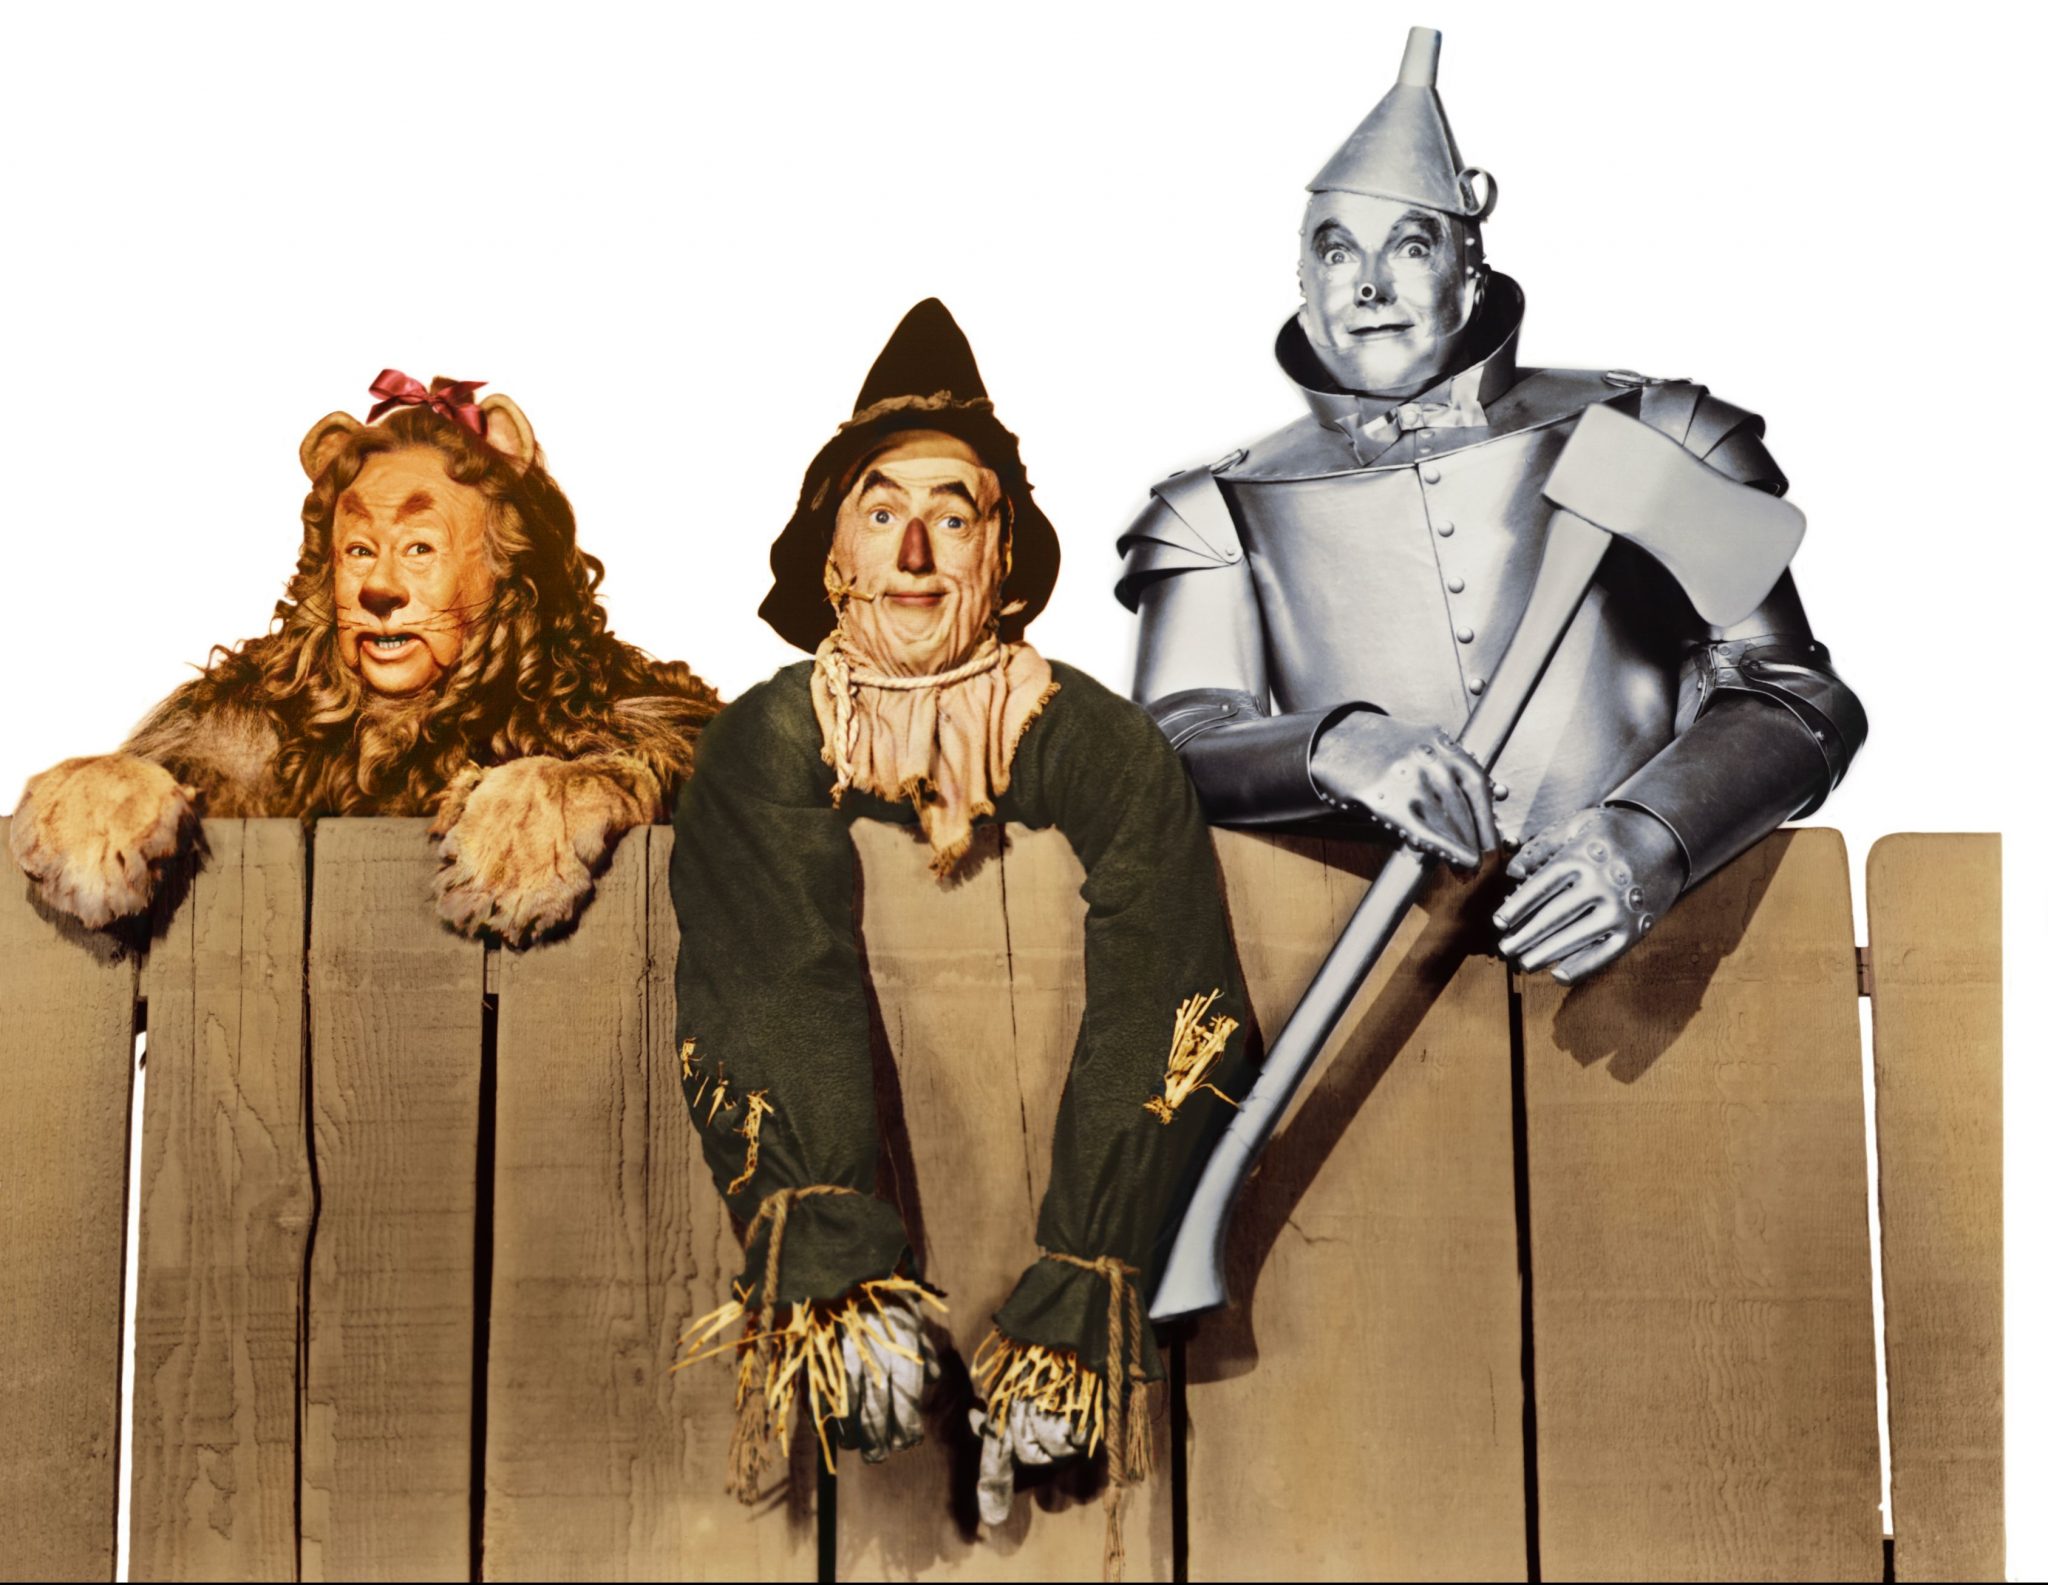 The Cowardly Lion, Scarecrow and Tin Man from The Wizard of Oz, 1939. (Photo Credit: MoviePics1001 / MovieStillsDB)